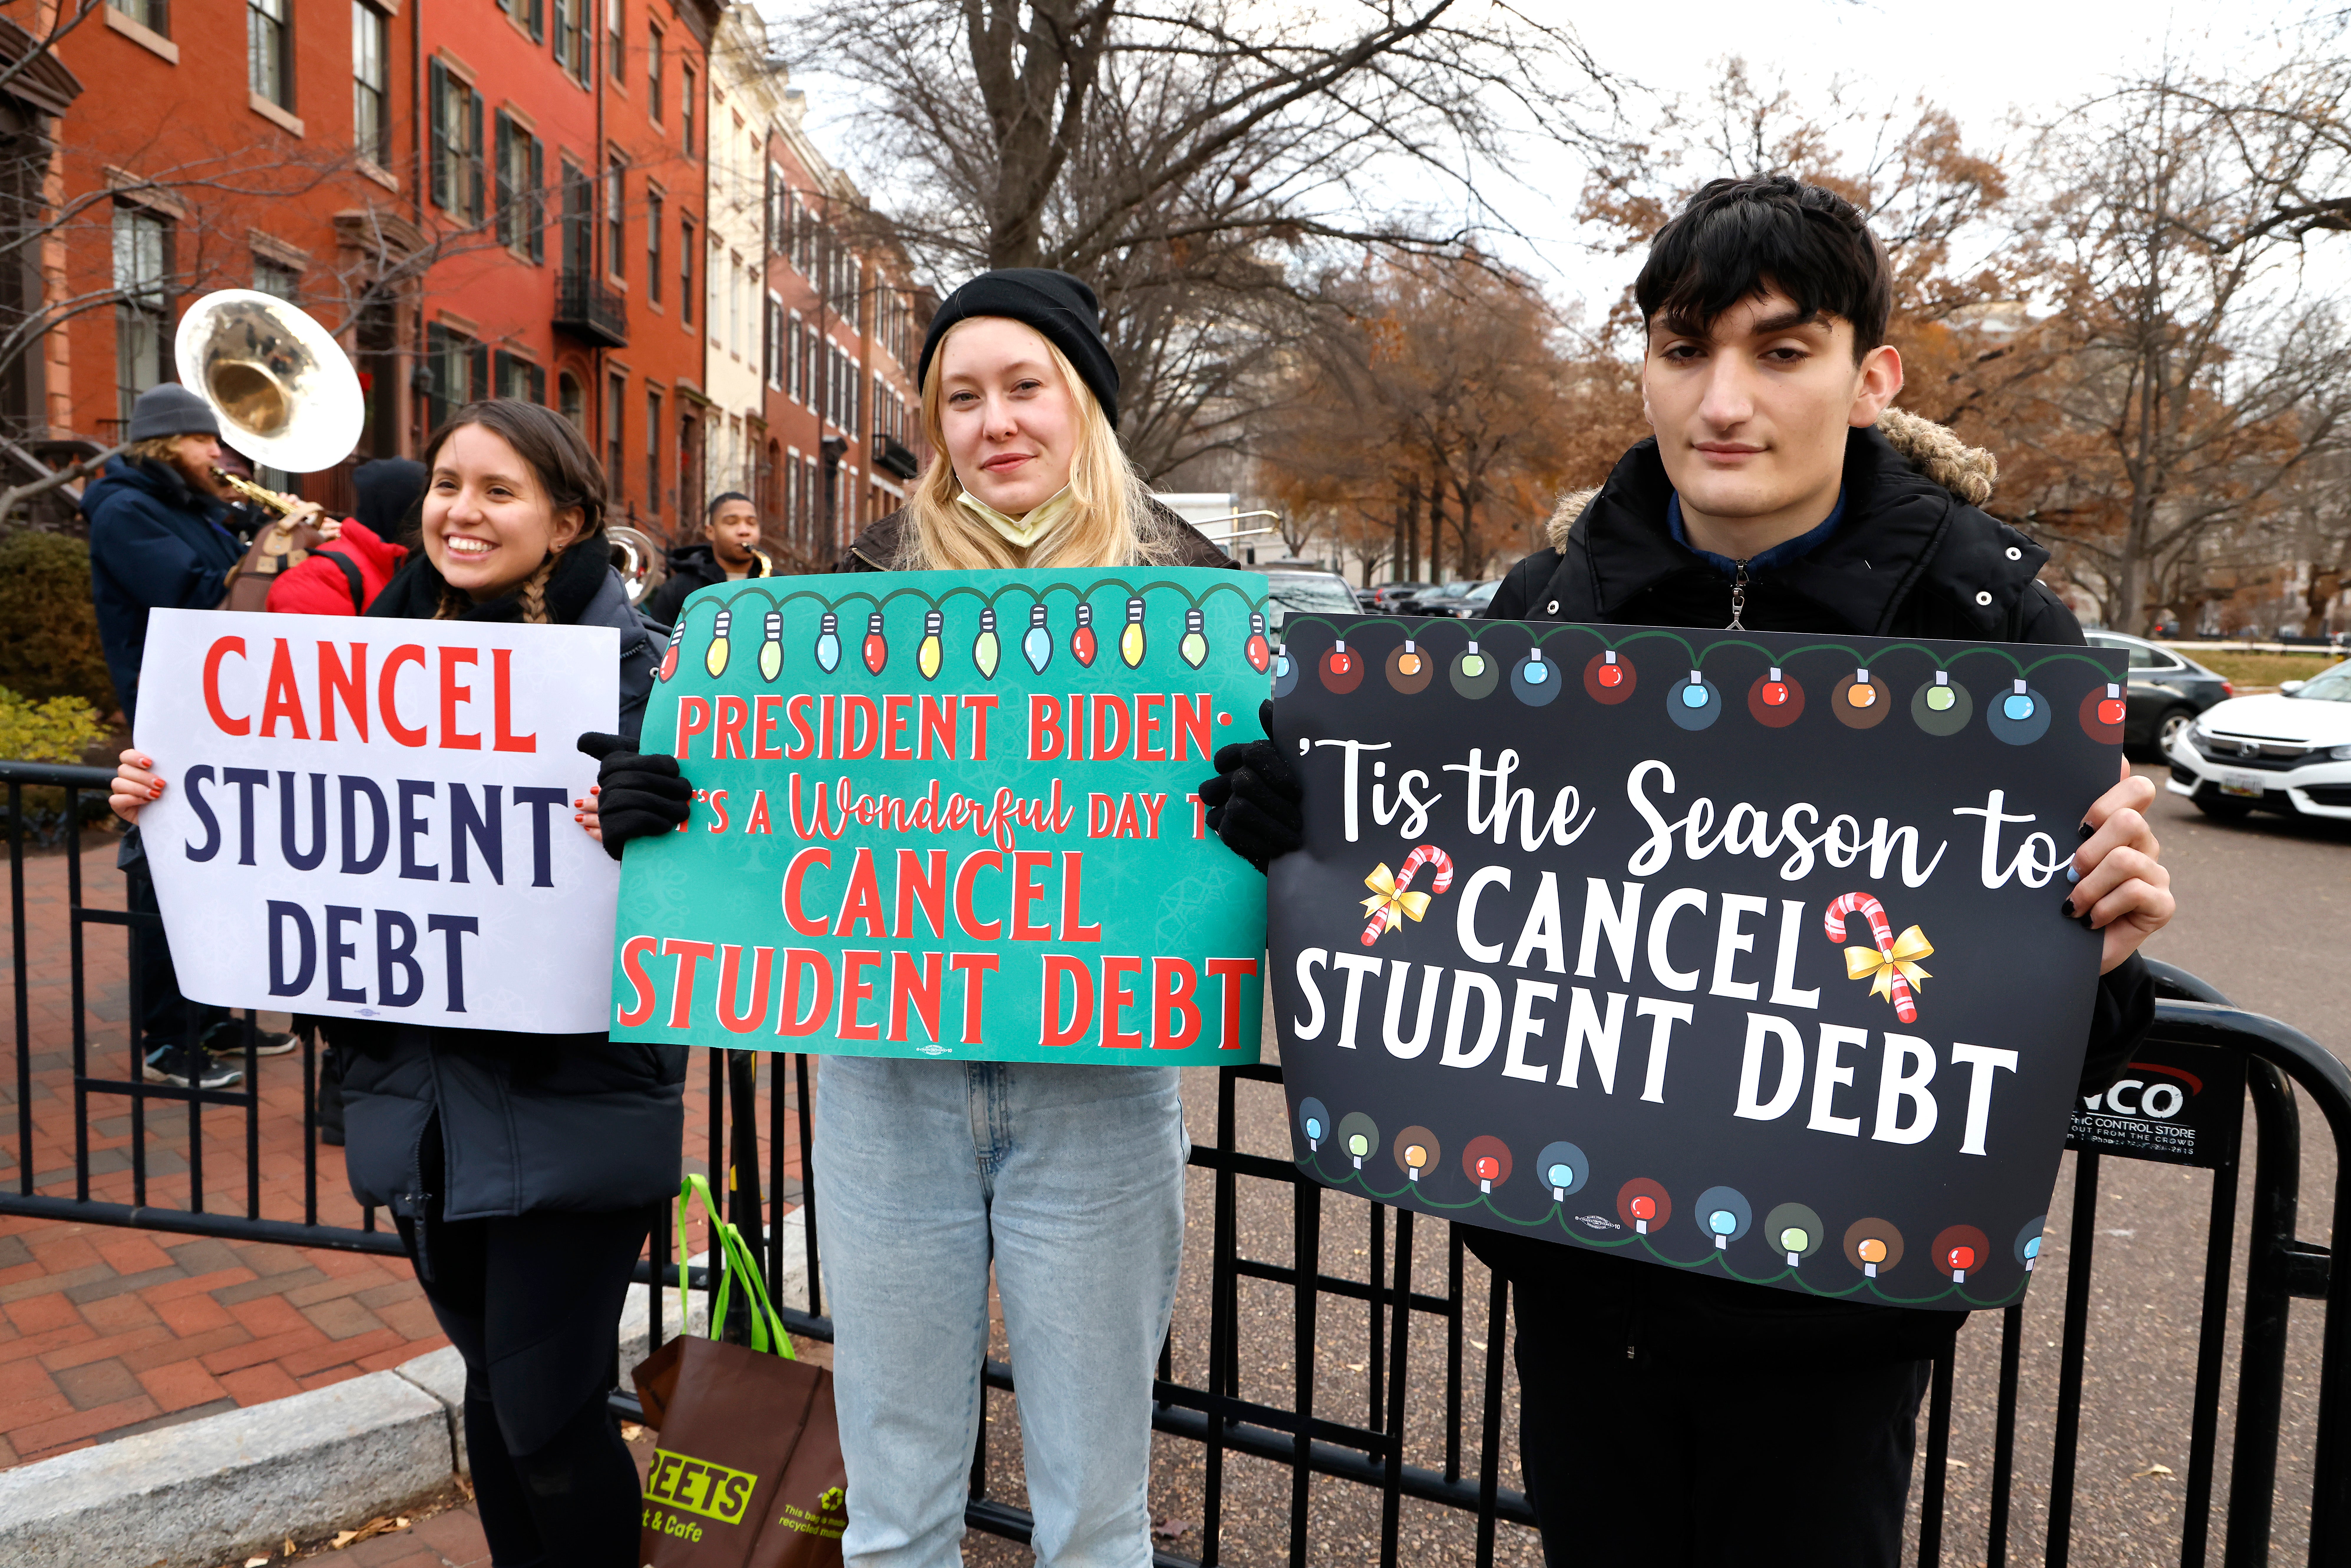 Activists hold festive signs calling on President Biden to cancel student debt and not resume student loan debt while musicians play joyful music, greeting the White House staff as they arrive to work on December 15, 2021 in Washington, DC.